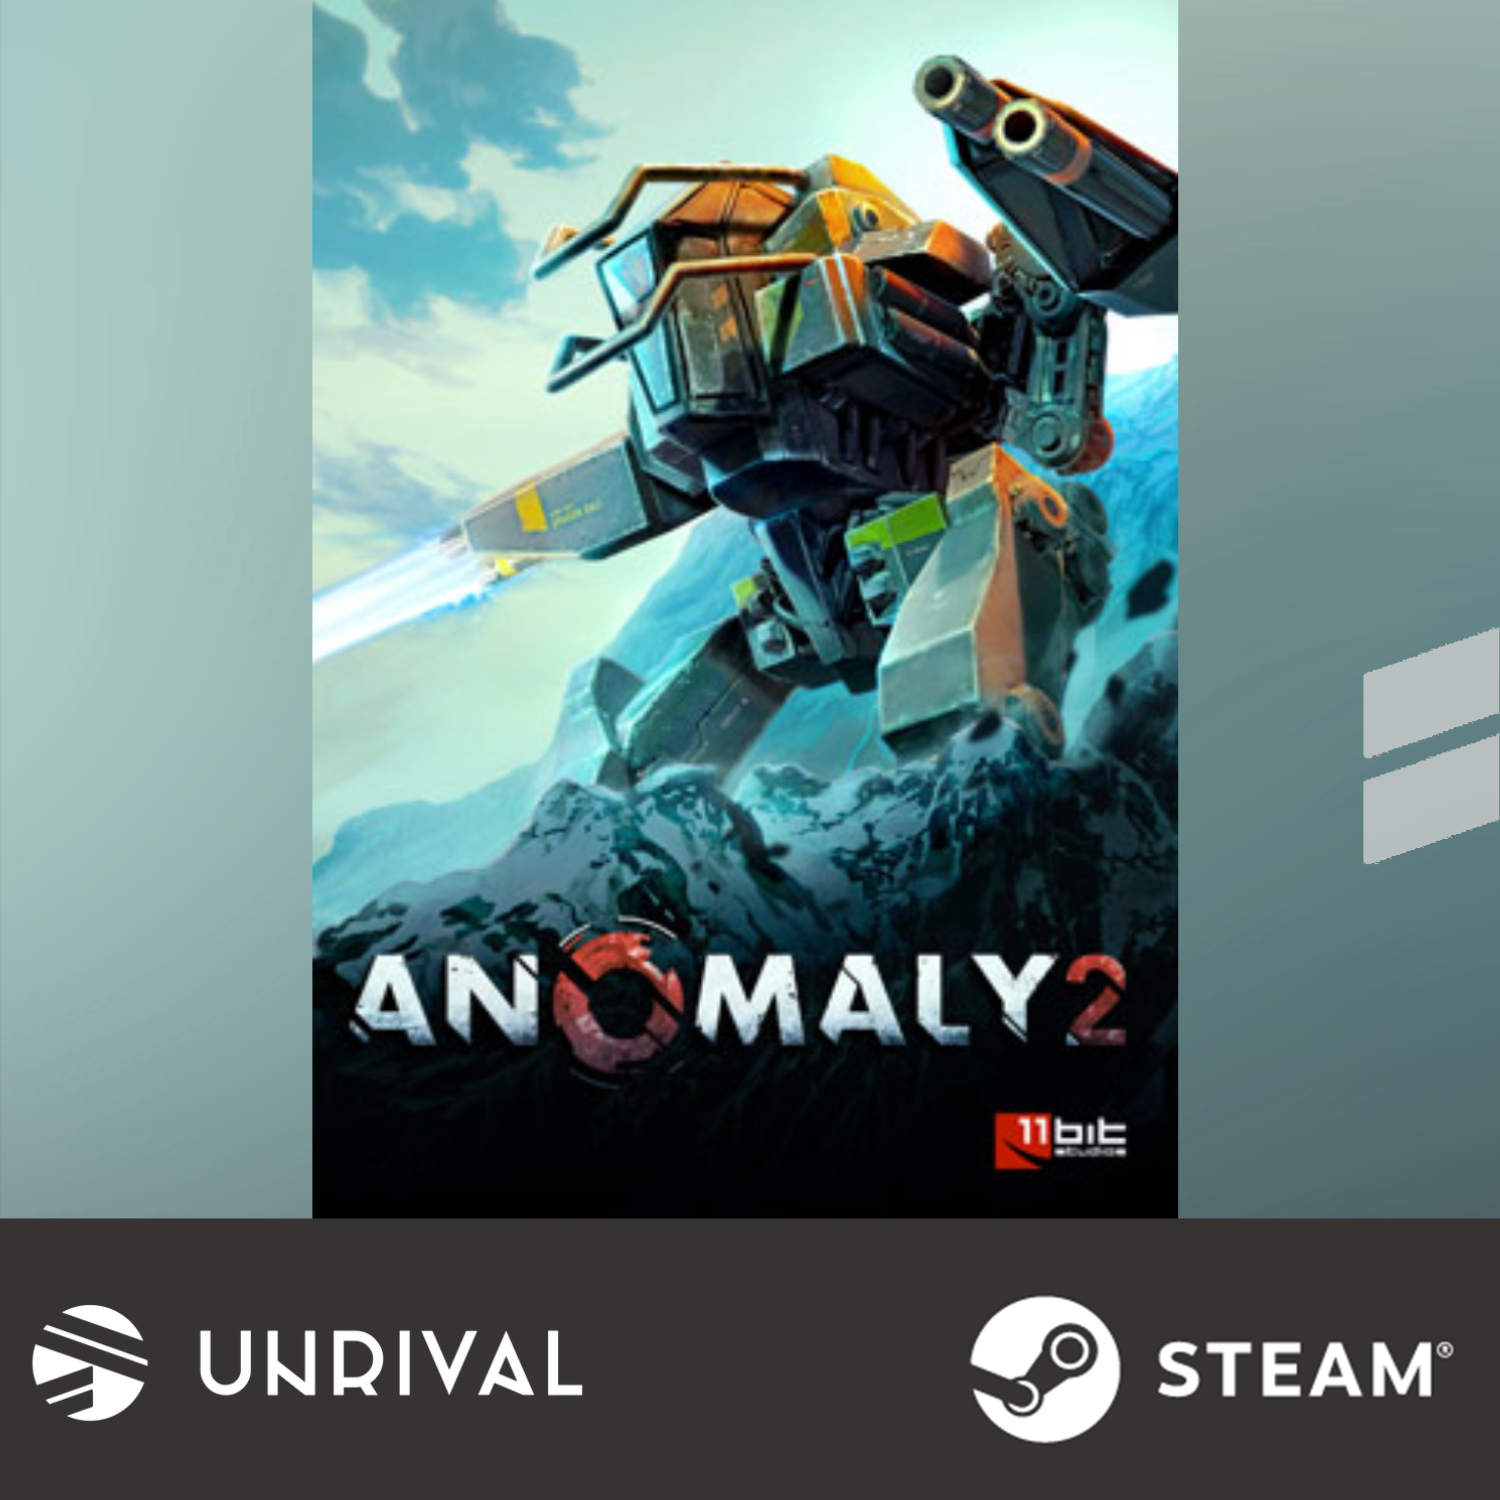 [Hot Sale] Anomaly 2 PC Digital Download Game (Multiplayer) - Unrival